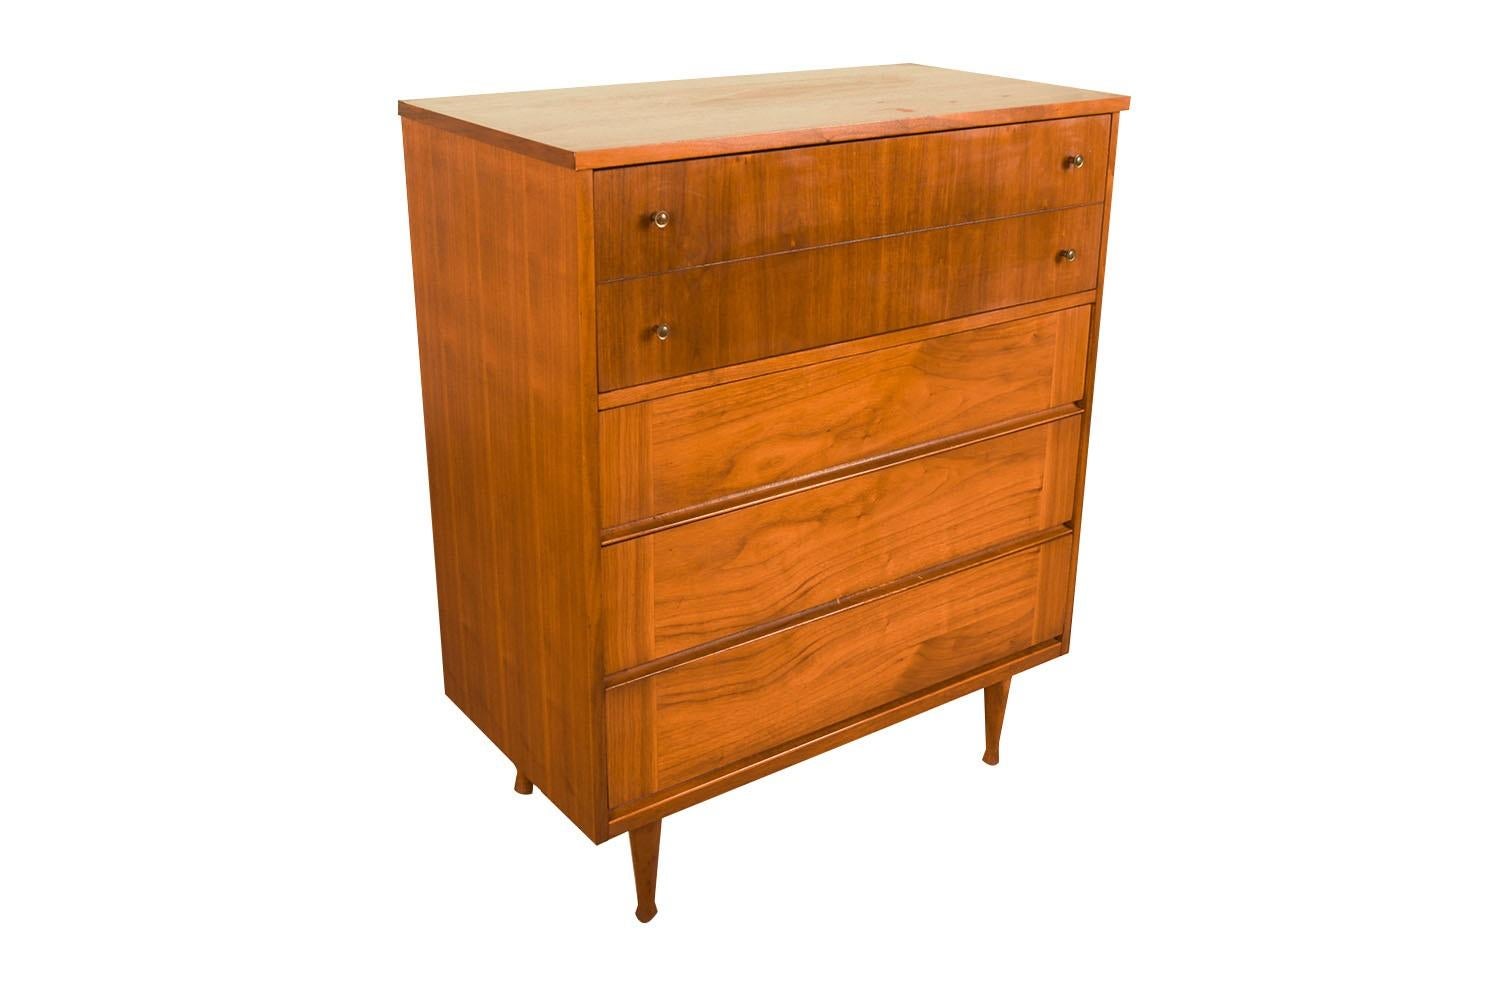 Attractive tall mid century modern sleek smooth face dresser. This is a very simple yet modern design. Each drawer has beautiful medium tone stunning walnut grains with minimal pulls. At the pull of the drawers you will expose plenty of storage. A